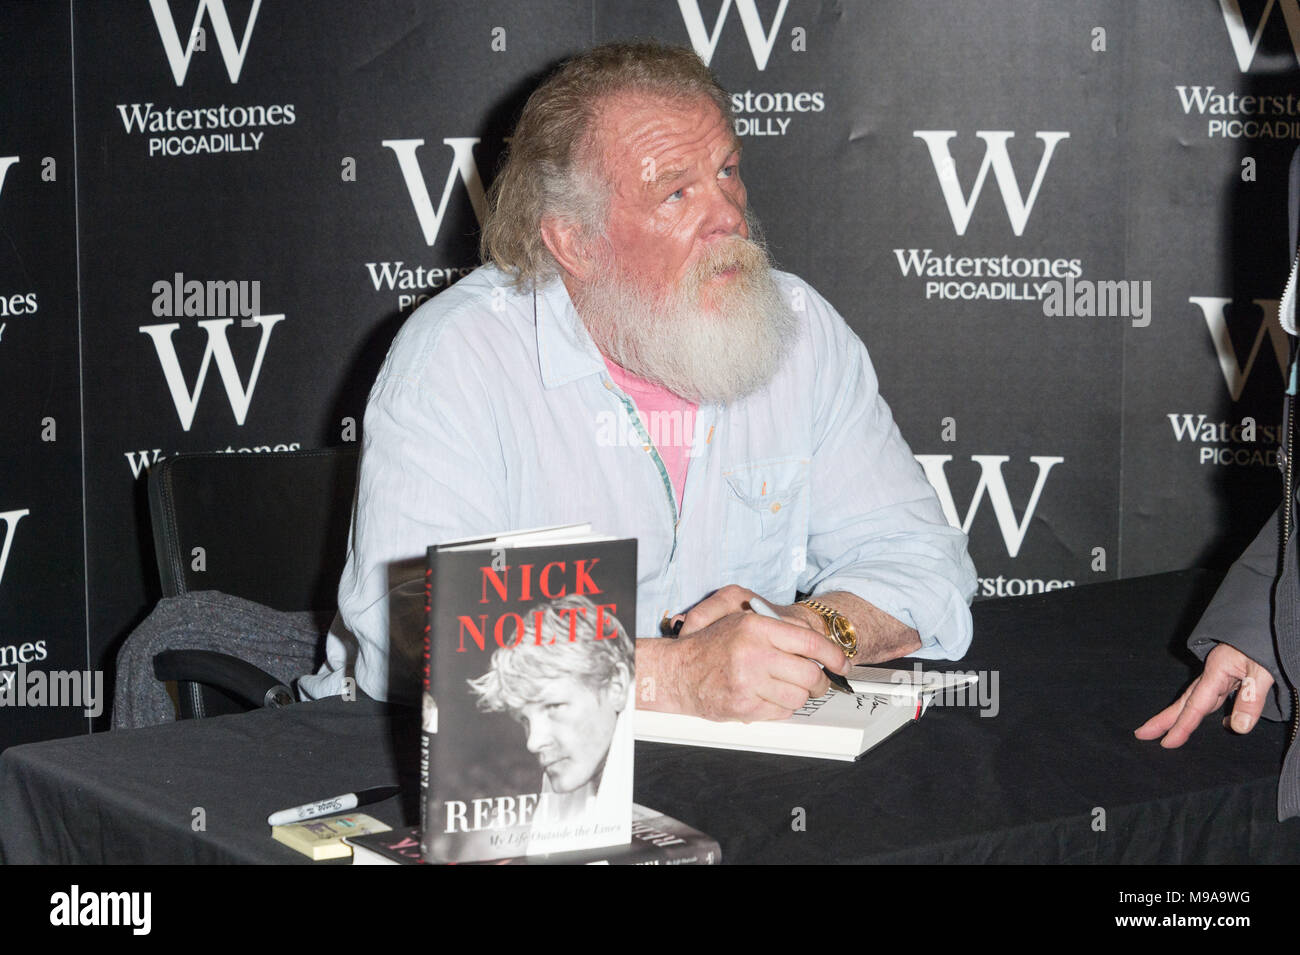 London, UK. 23rd March, 2018. American actor Nicke Nolte attends a Waterstones book signing for his autobiography Rebel, My Life Outside The Lines, London, UK Credit: Raymond Tang/Alamy Live News Stock Photo